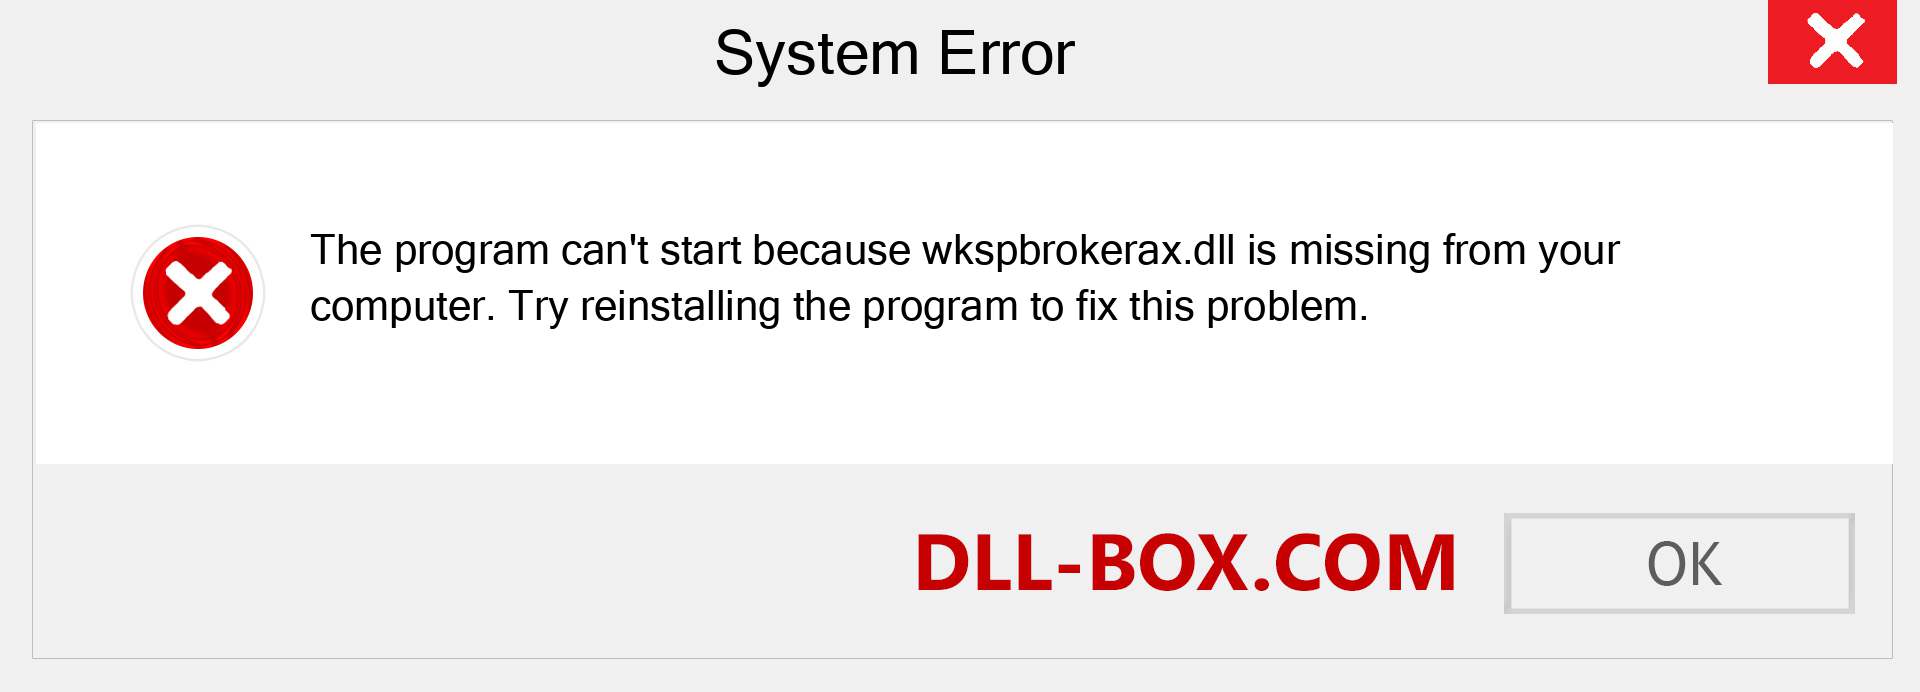  wkspbrokerax.dll file is missing?. Download for Windows 7, 8, 10 - Fix  wkspbrokerax dll Missing Error on Windows, photos, images